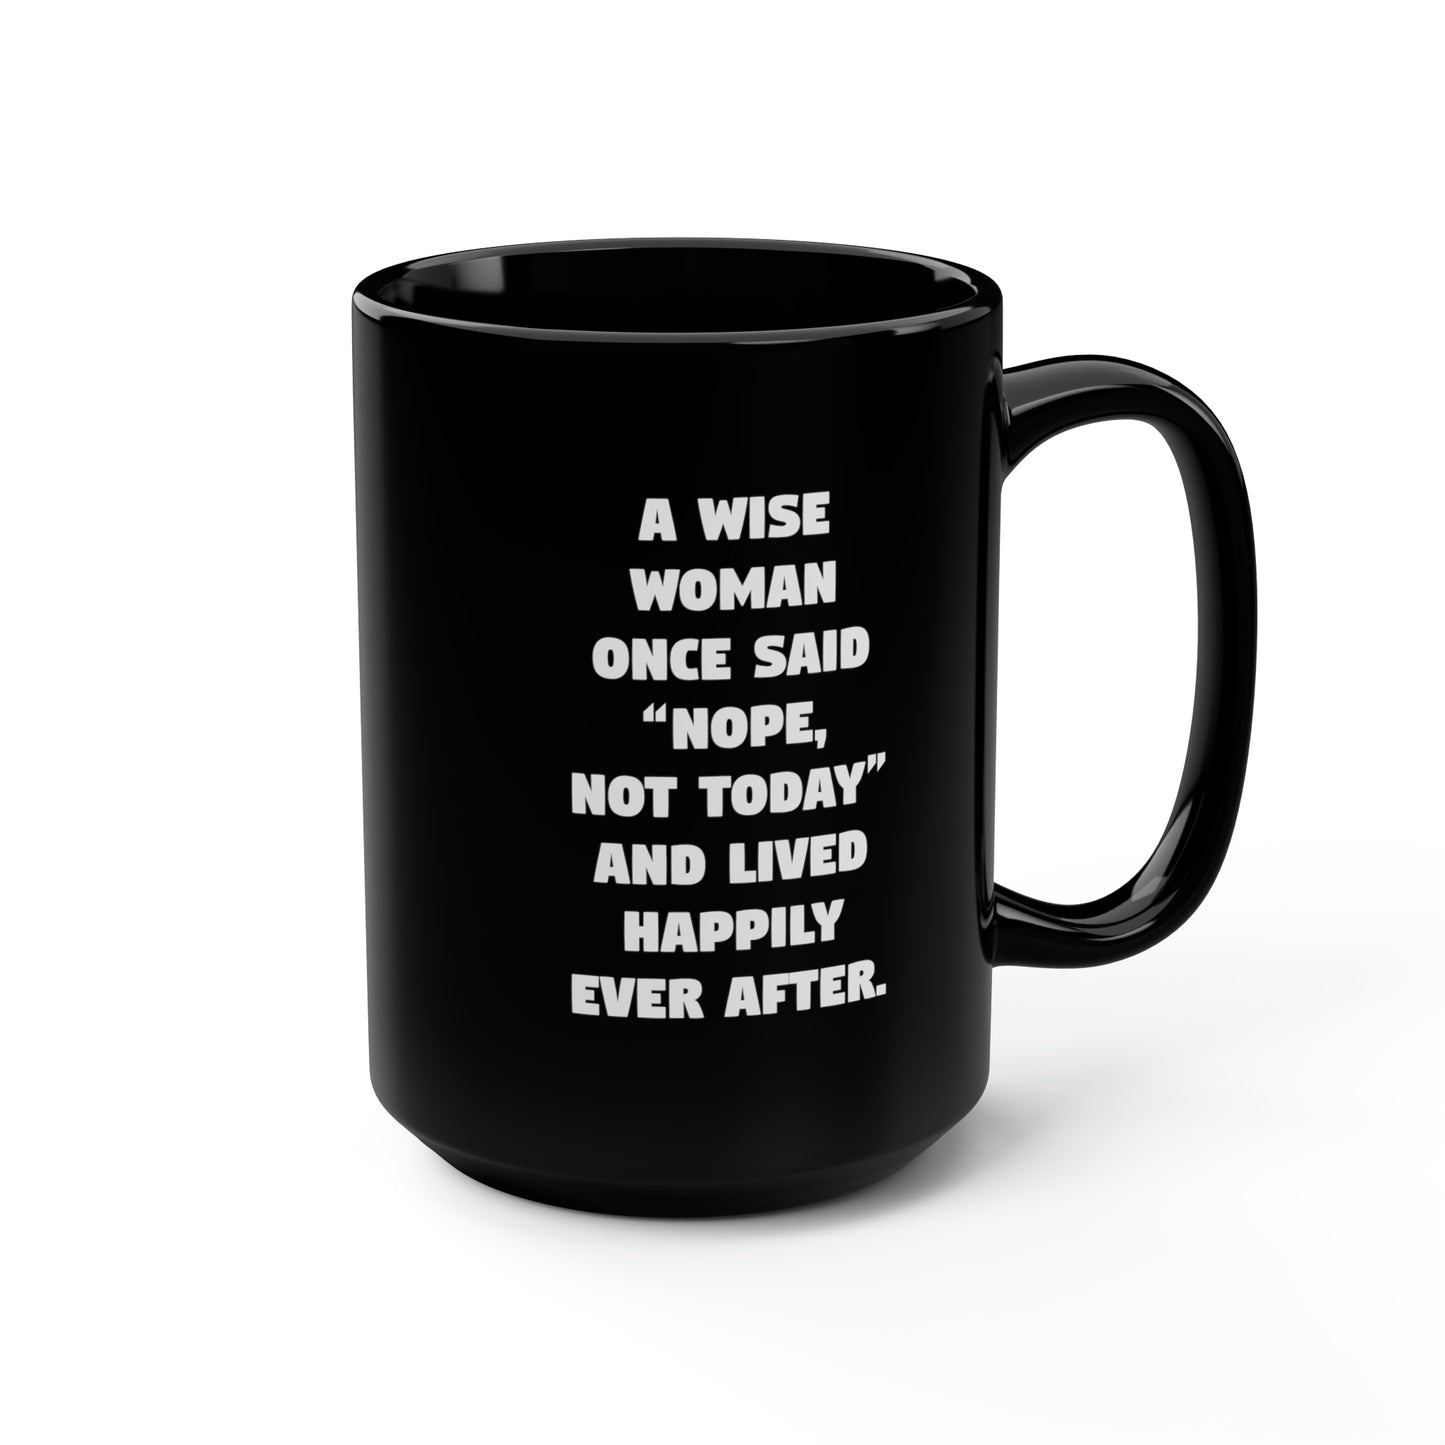 A Wise Woman Once Said 'Nope, Not Today' And Lived Happily Ever After Black Mug, 15oz